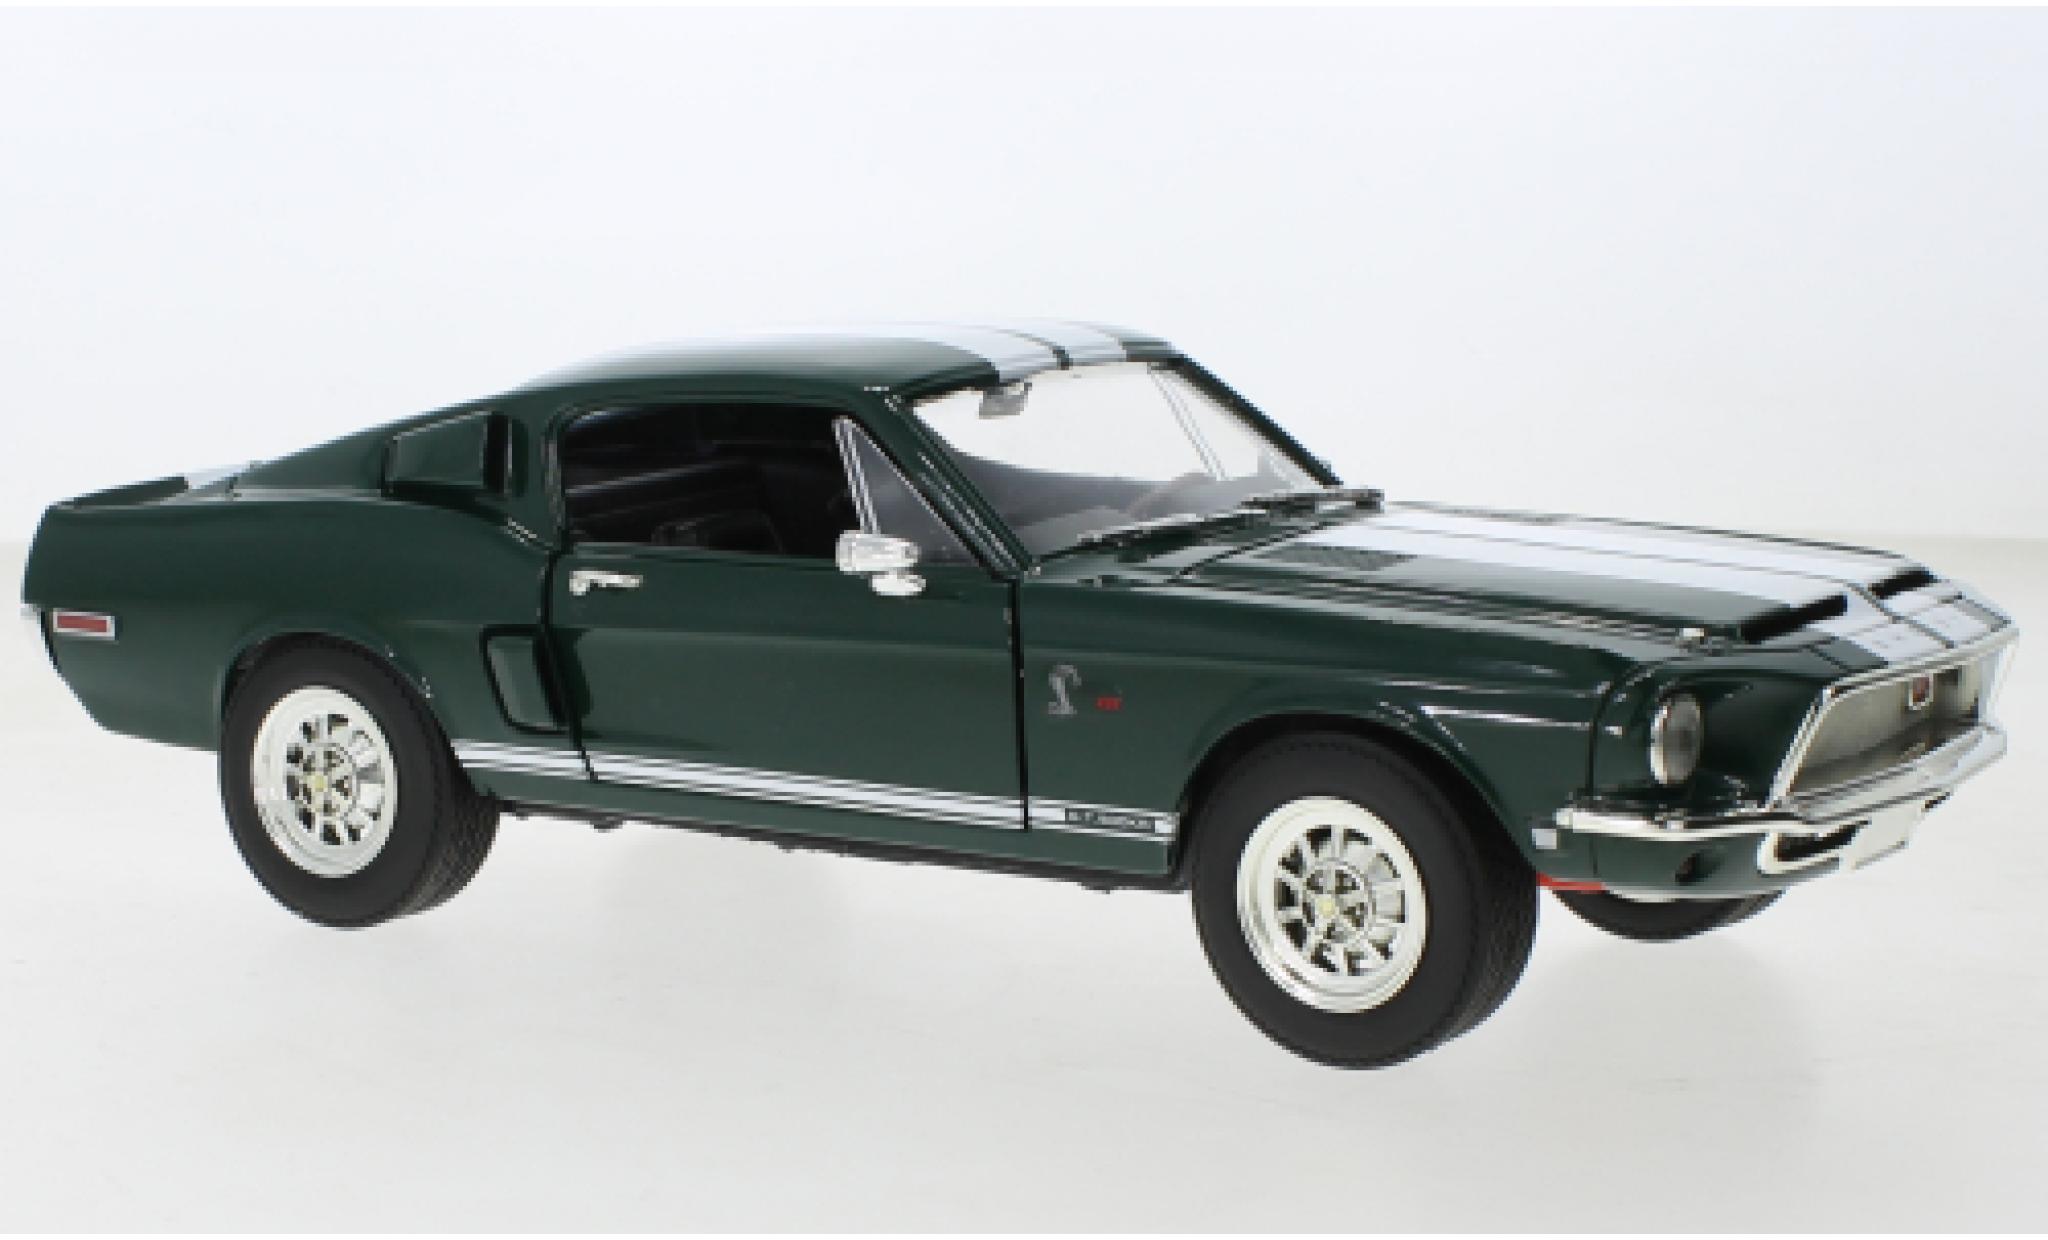 1967 SHELBY GT-350 FORD MUSTANG 1/18 SCALE DIECAST CAR MODEL BY AUTO WORLD  AMM1227